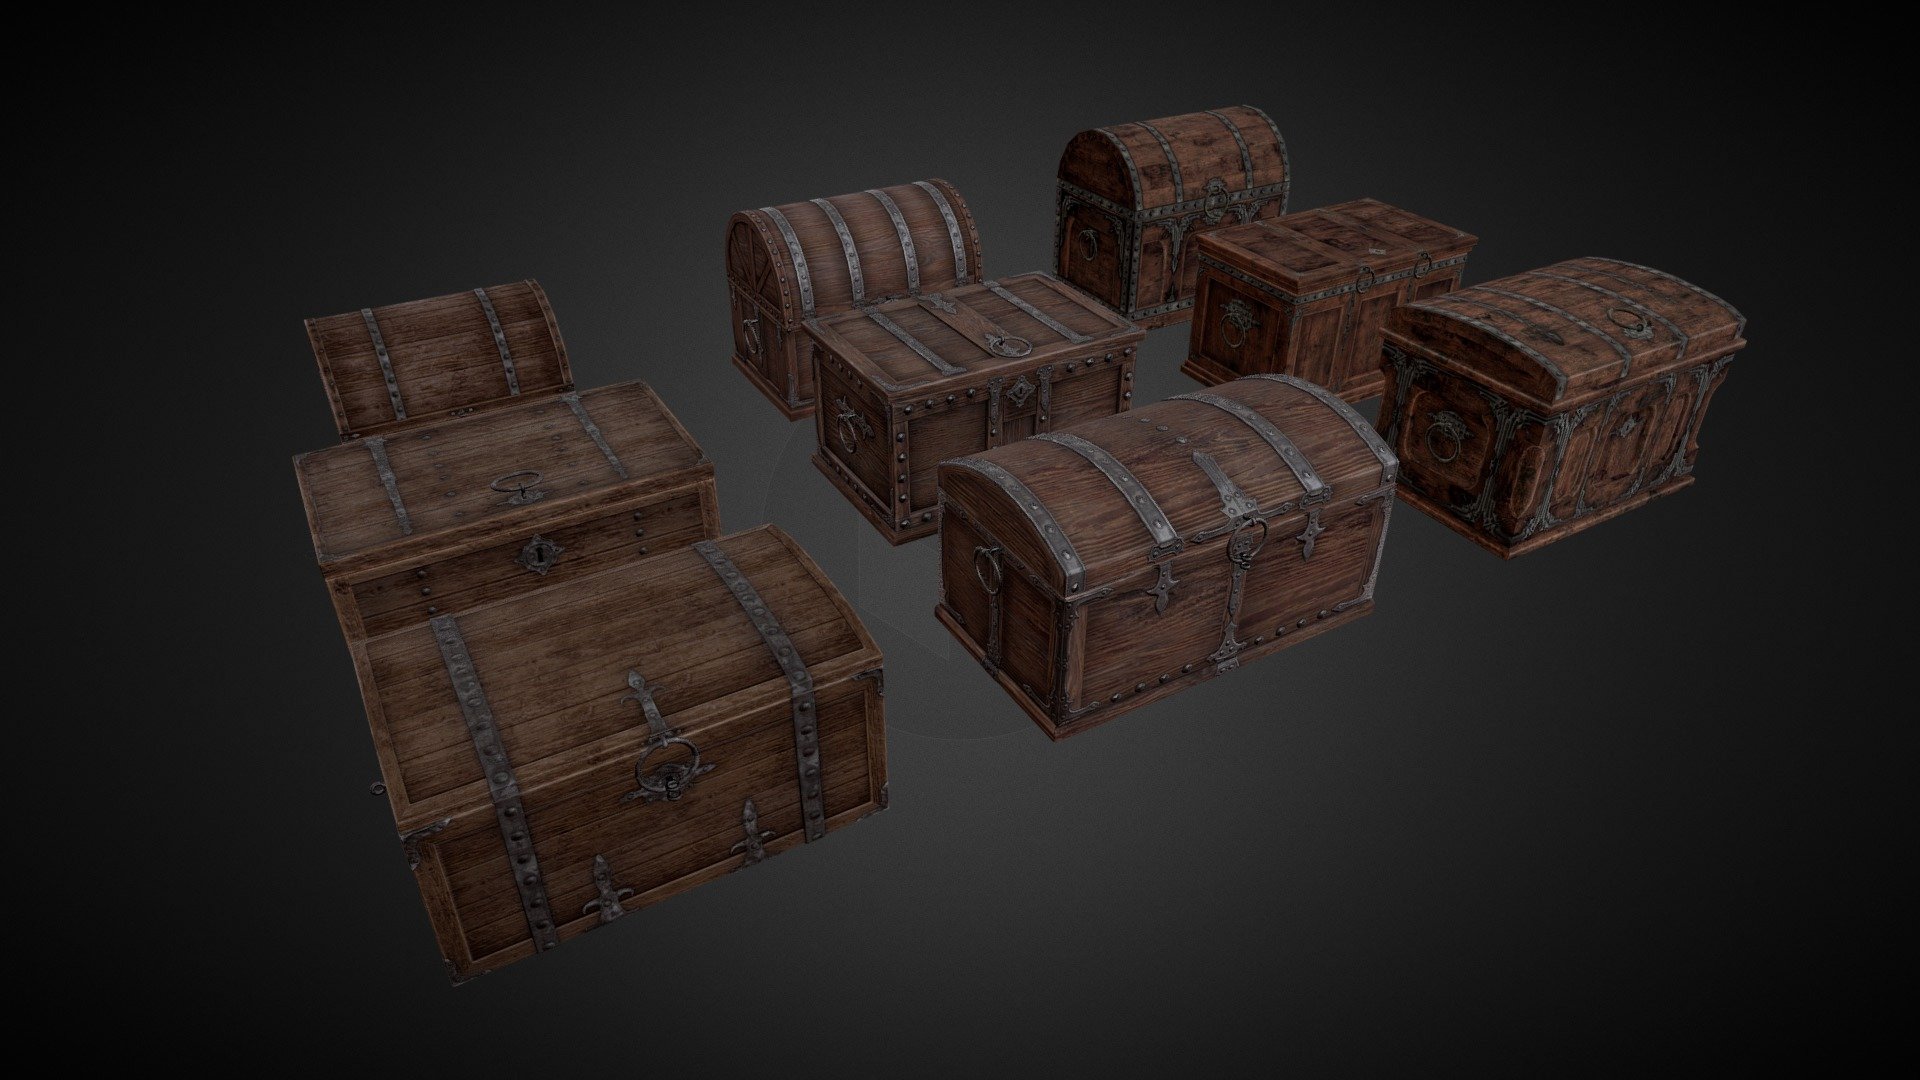 Low poly game ready Chests/crates. 3 levels with 3 chest types each.

Textures included, .PNG format, 4k resolution:
Color/albedo map + alpha channel; 
Normal y+ maps; 
RSM - roughness, specular, metallic - maps; - Medieval/Fantasy style Loot crates - Buy Royalty Free 3D model by EldersCrawler (@multidesign) 3d model